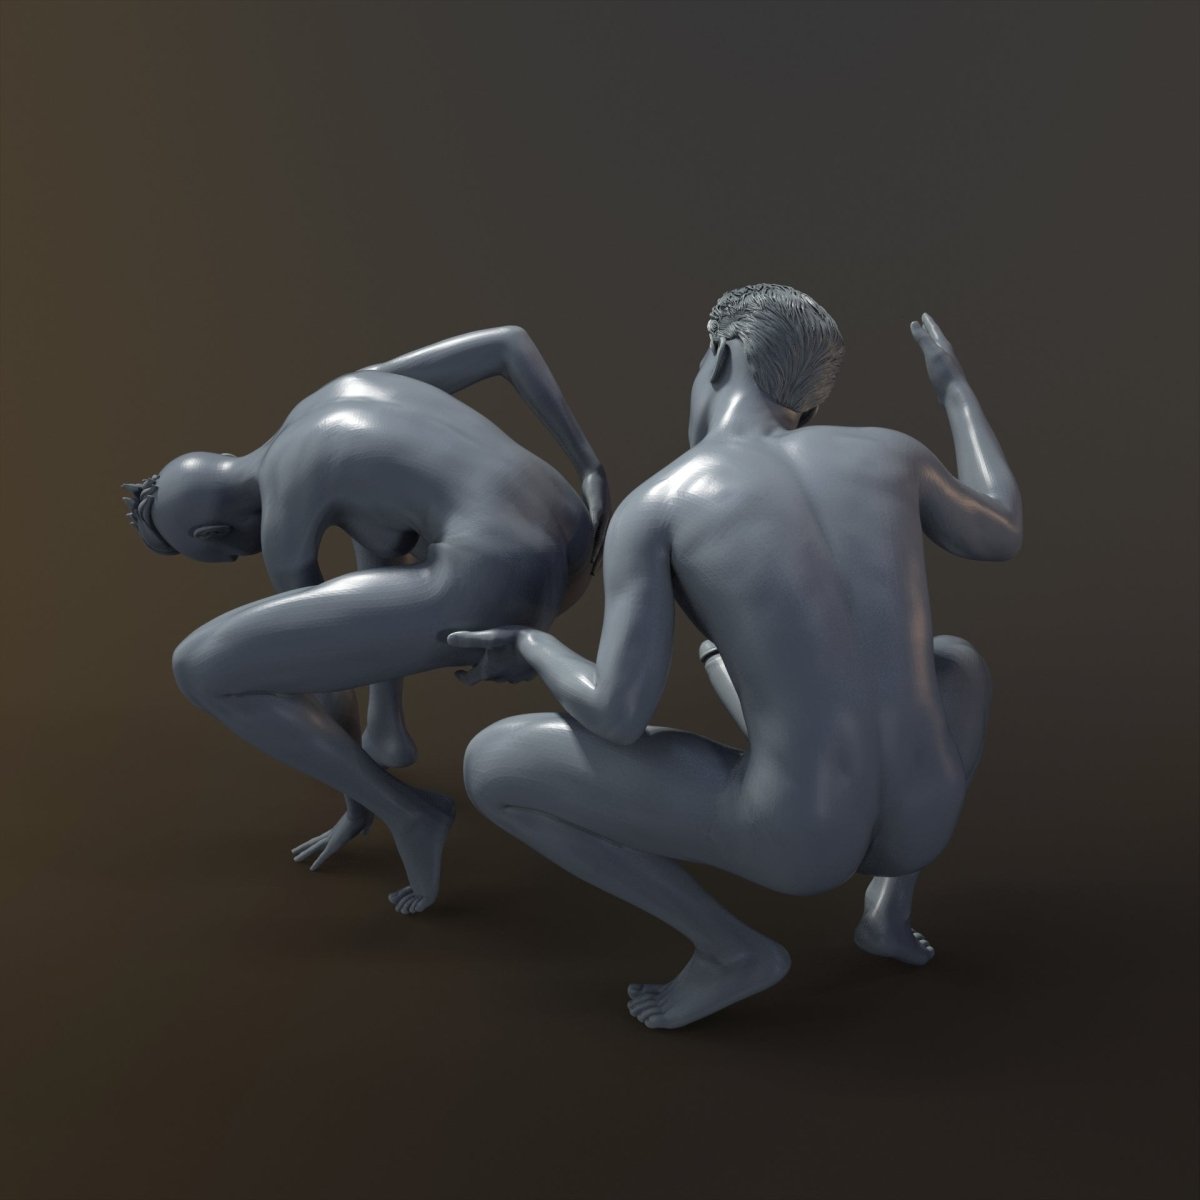 COUPLE SPANKING LOVE 3 Naked 3d Printed miniature Resin Collectables Statues & Figurines